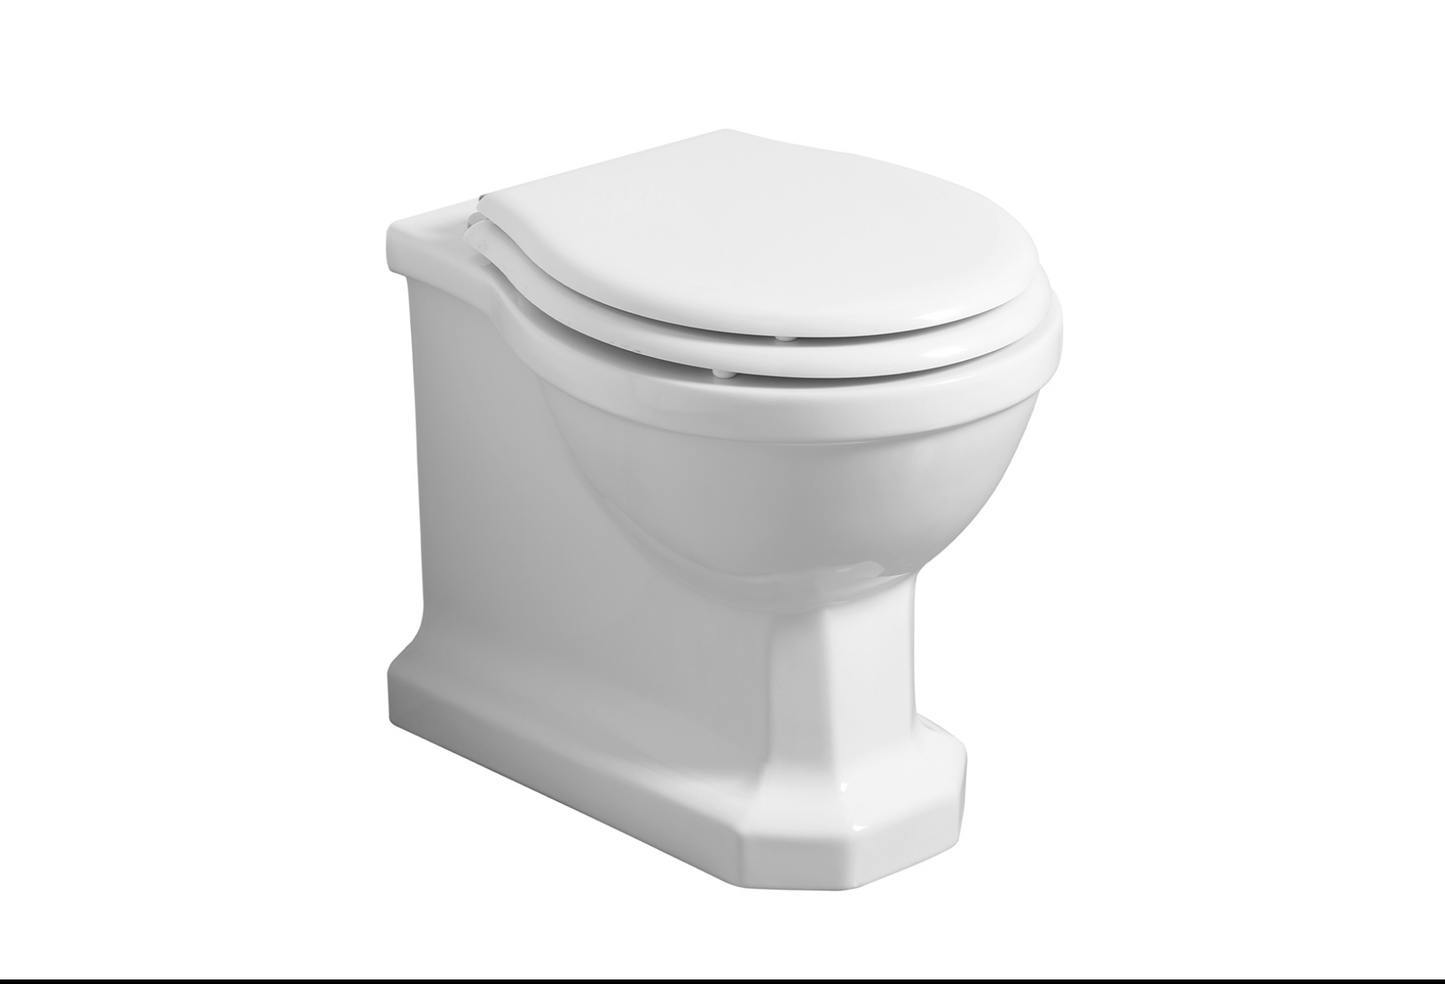 Provence 900 floor-standing ceramic WC / Bidet by Balneo Toscia Classic style